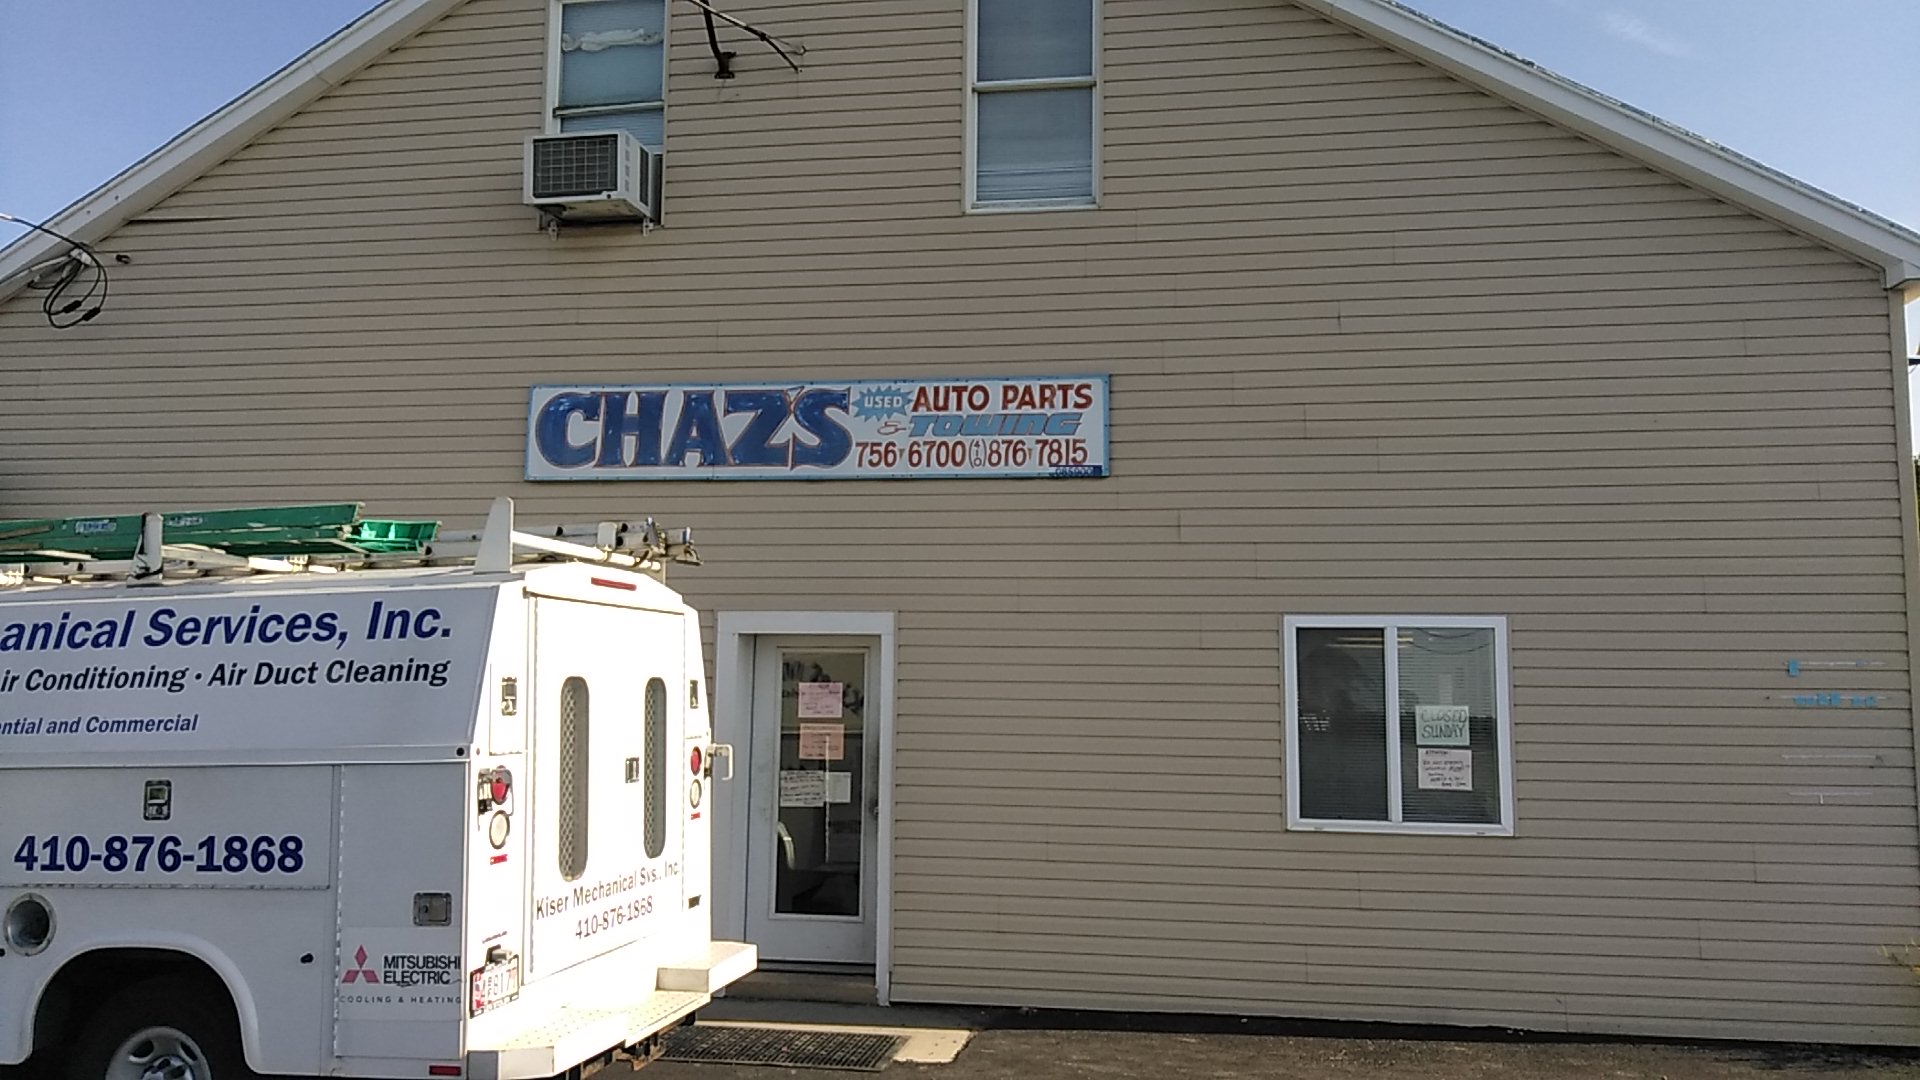 Chaz's Used Auto Parts & Towing Inc